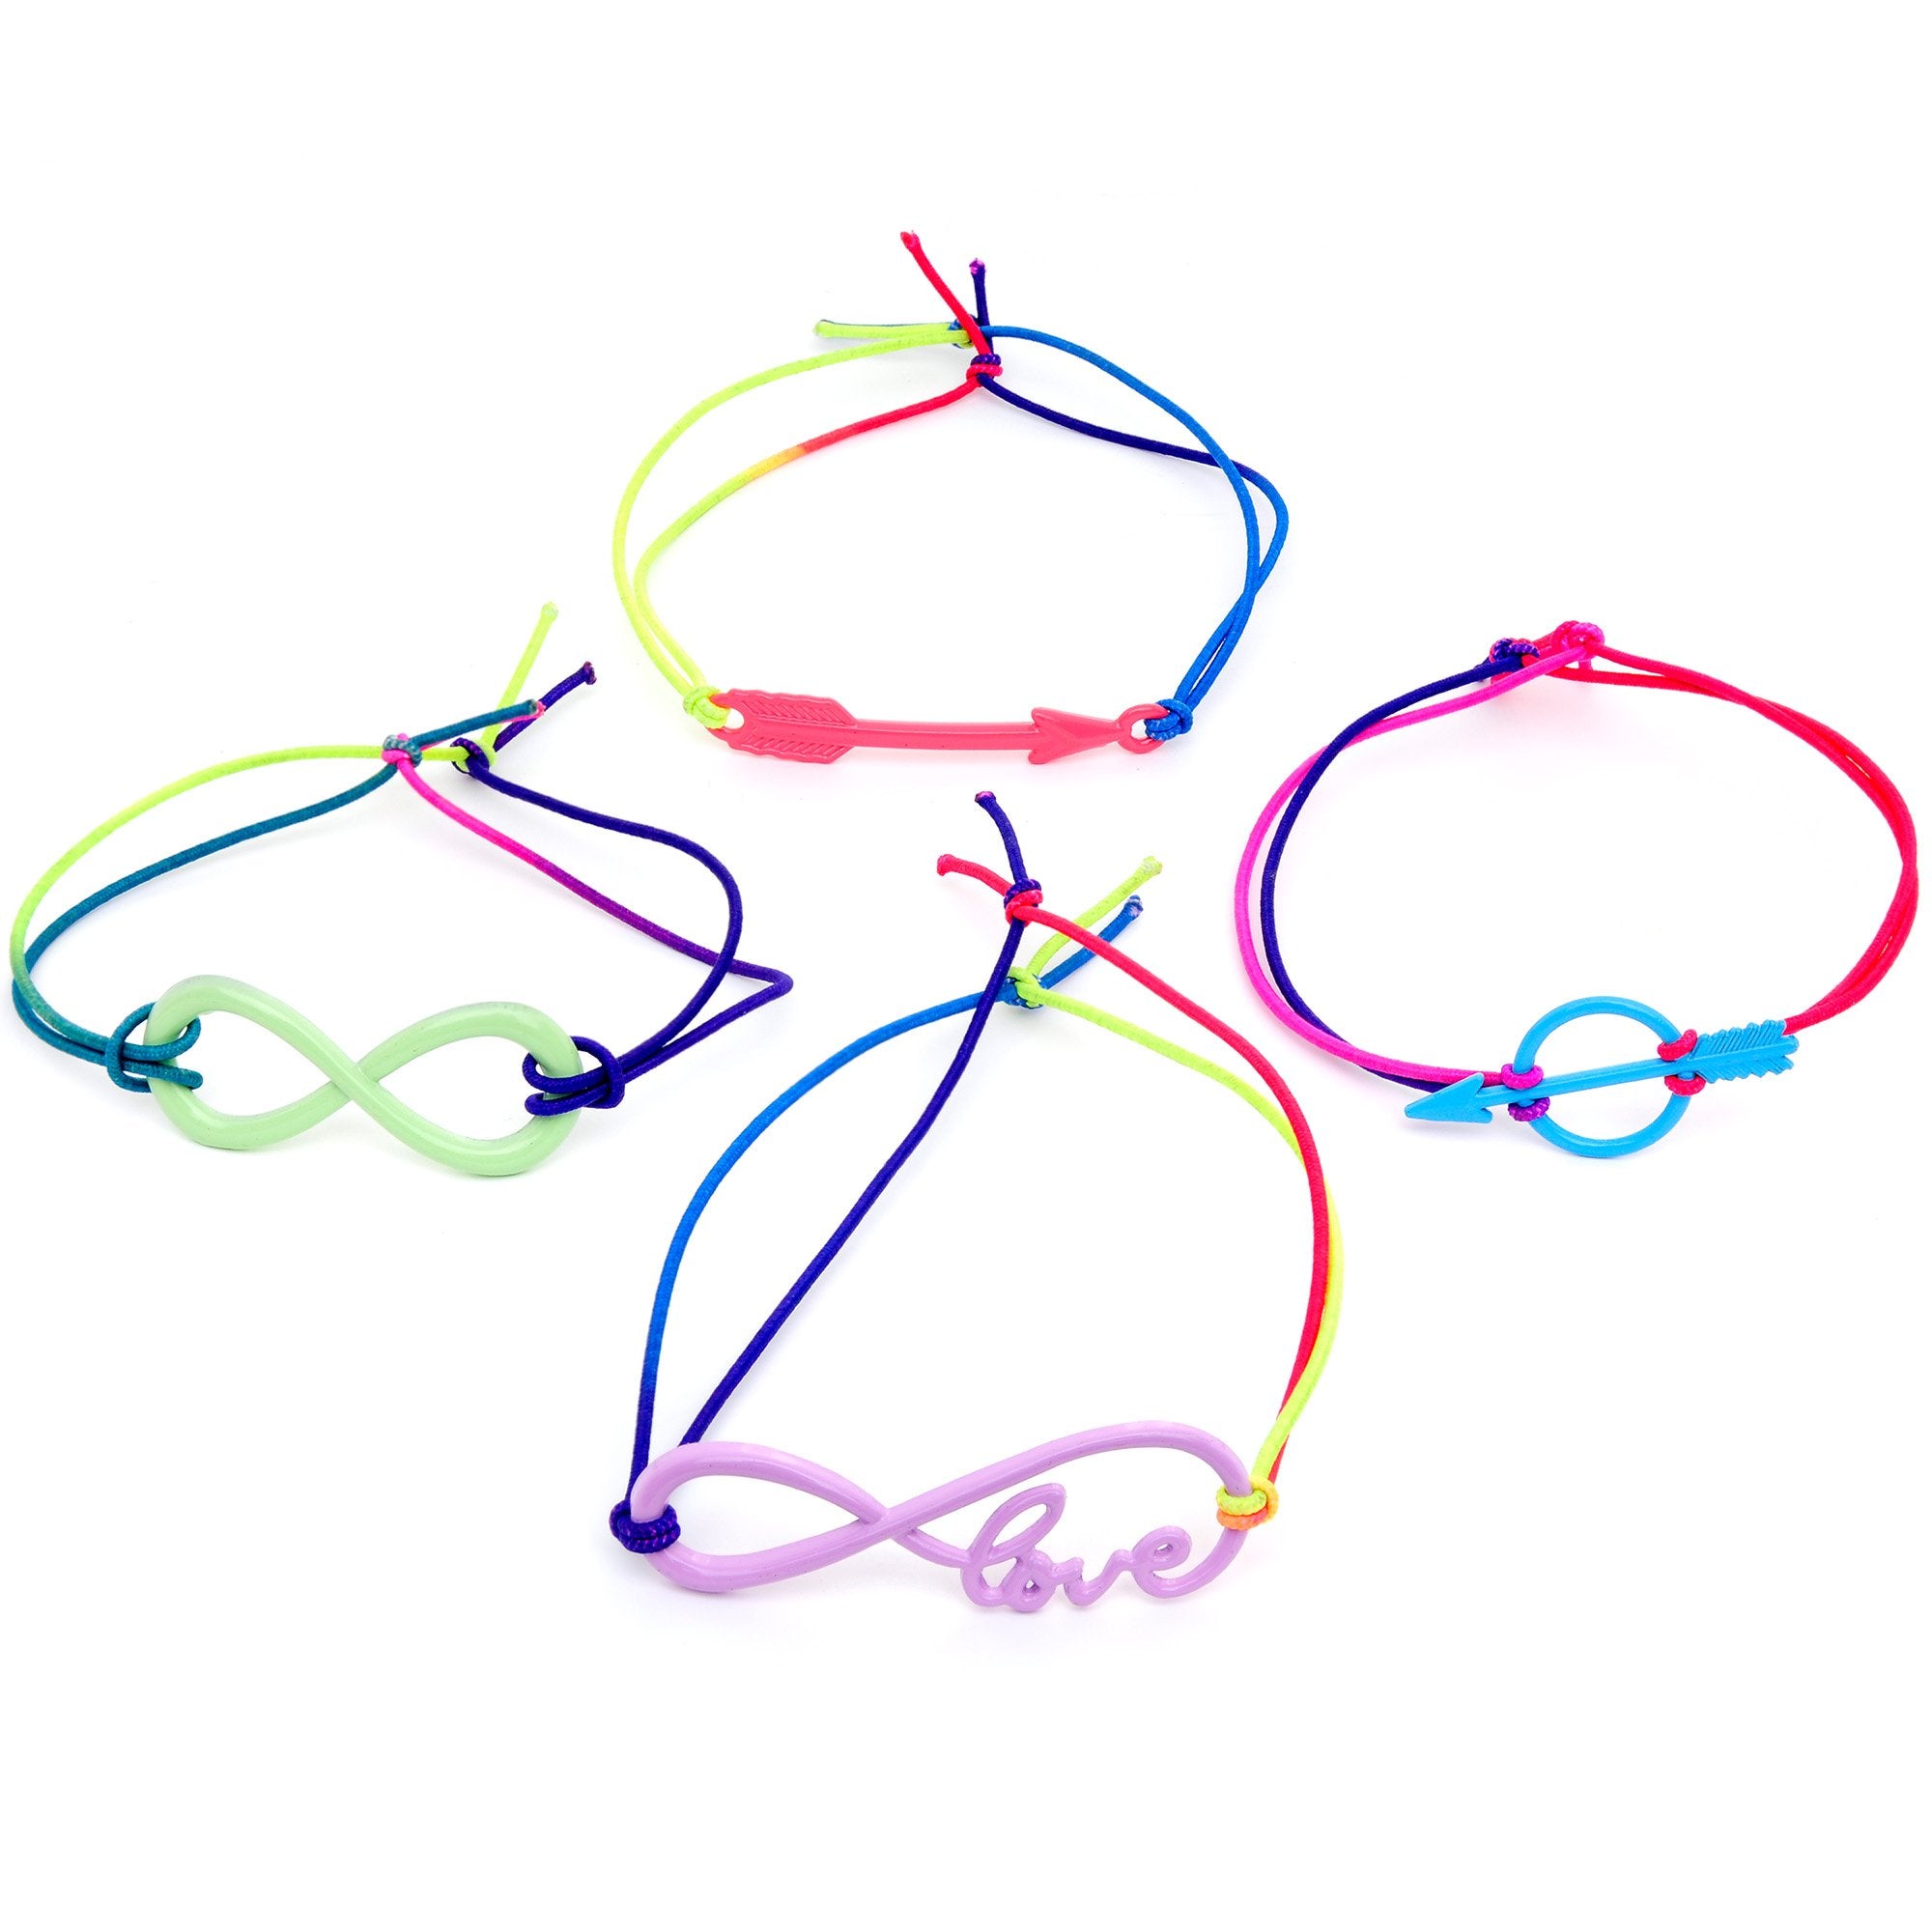 Handcrafted Multi Color Infinity Arrow Love Stretchy Bracelet 4 Pack Set